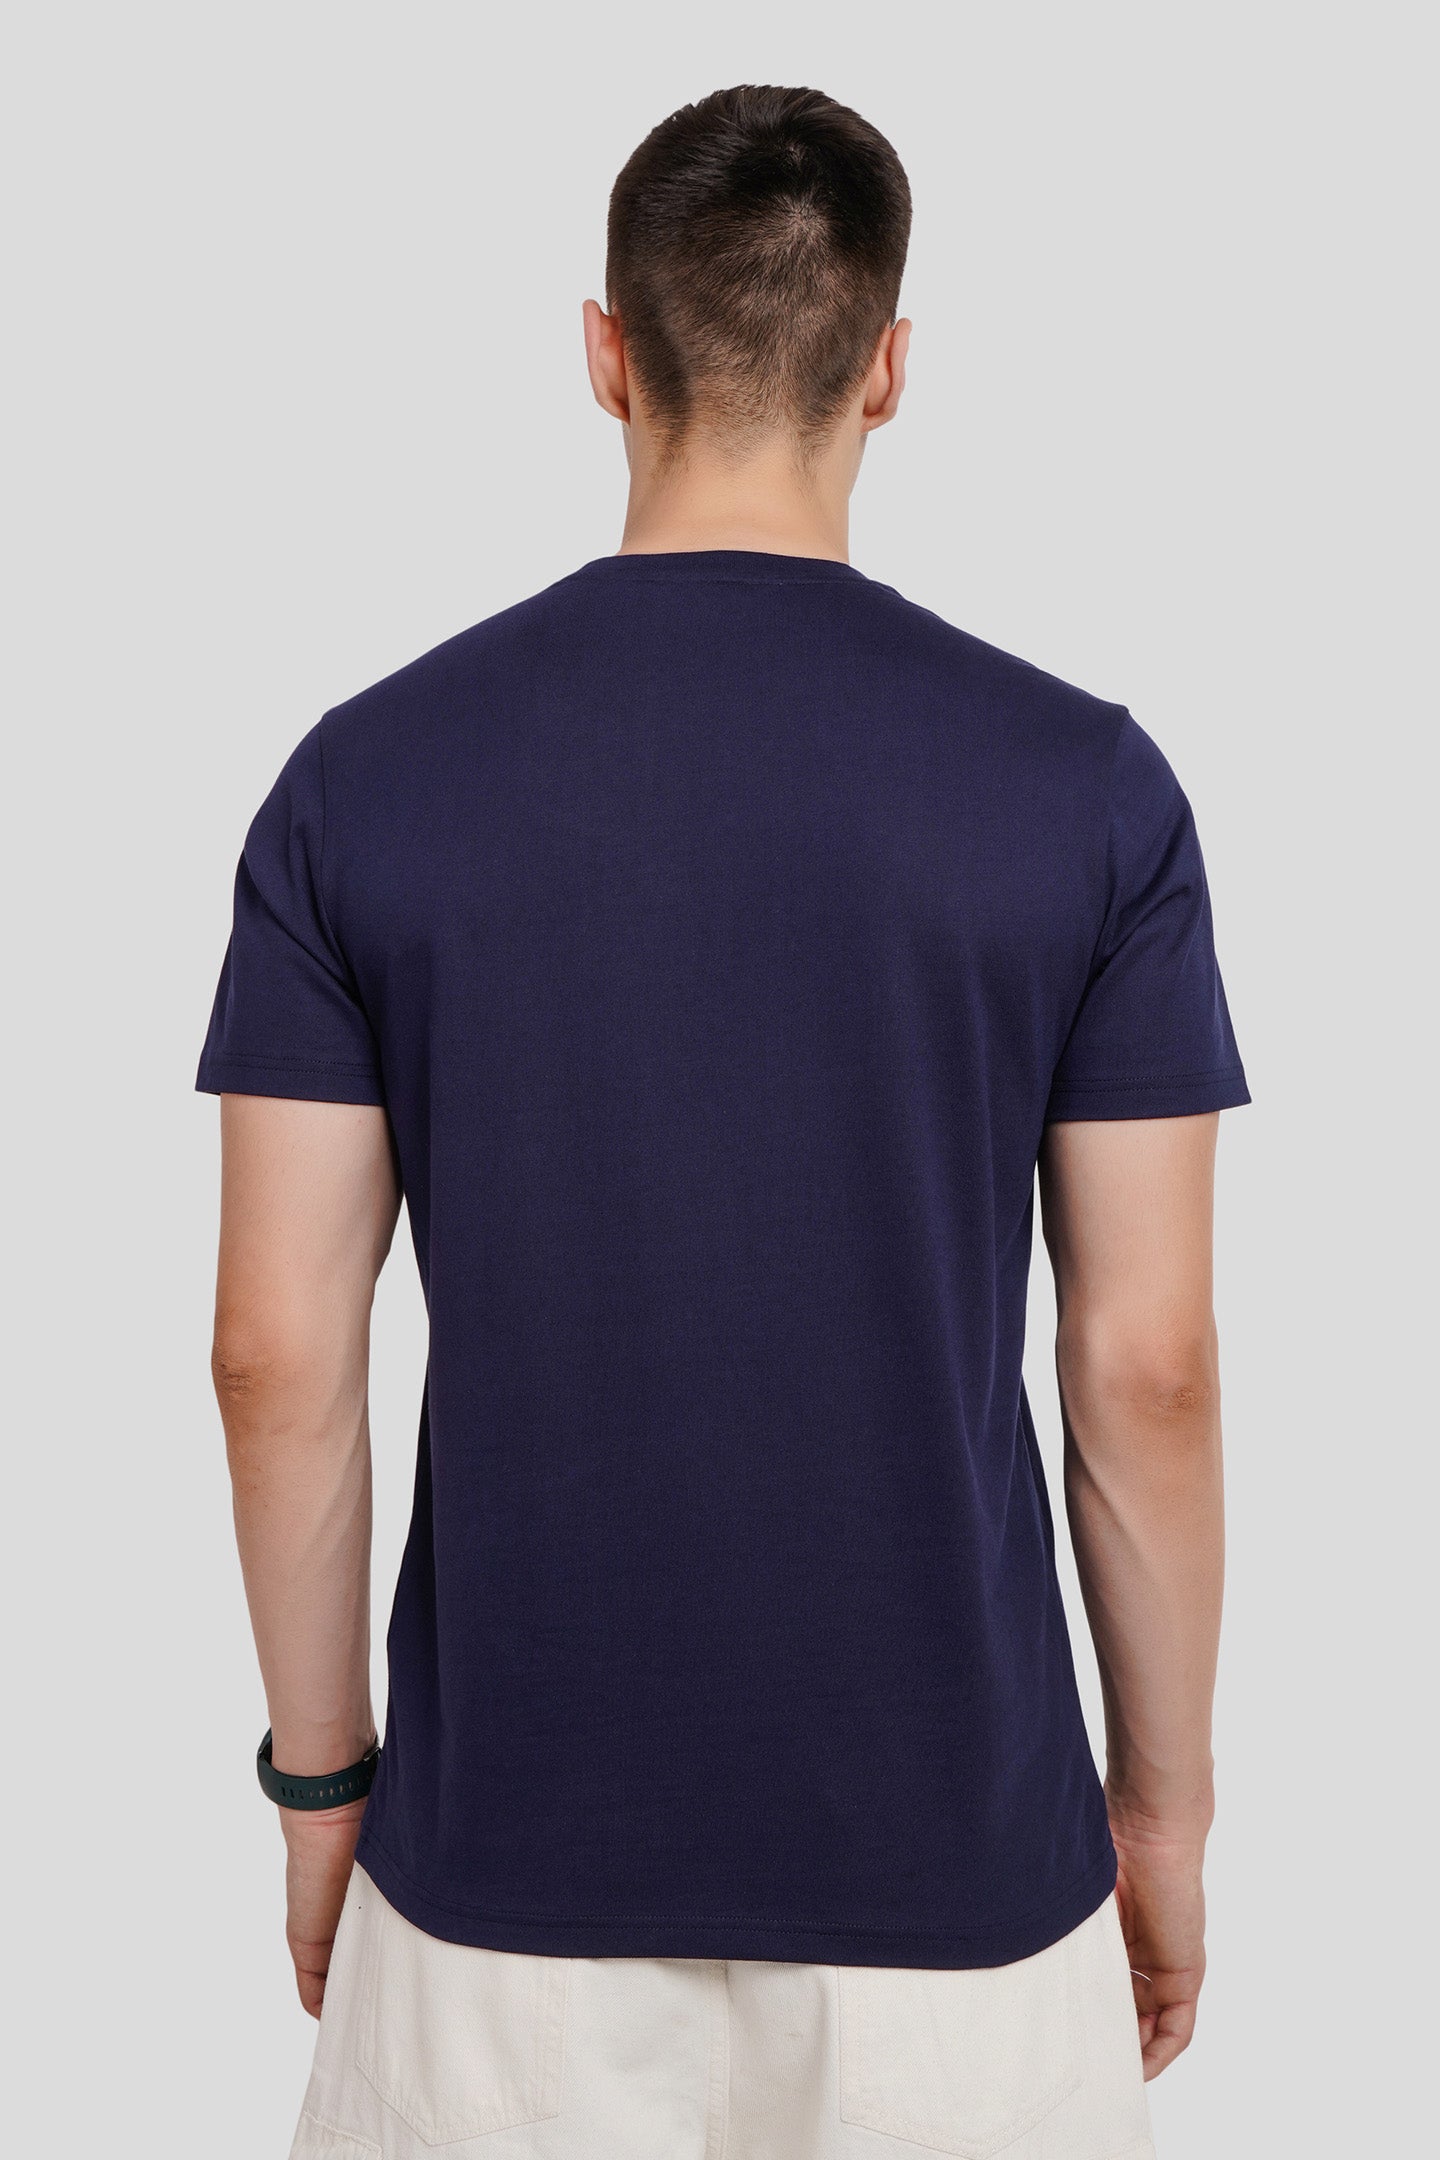 Real Boss Navy Blue Printed T Shirt Men Regular Fit With Front Design Pic 2